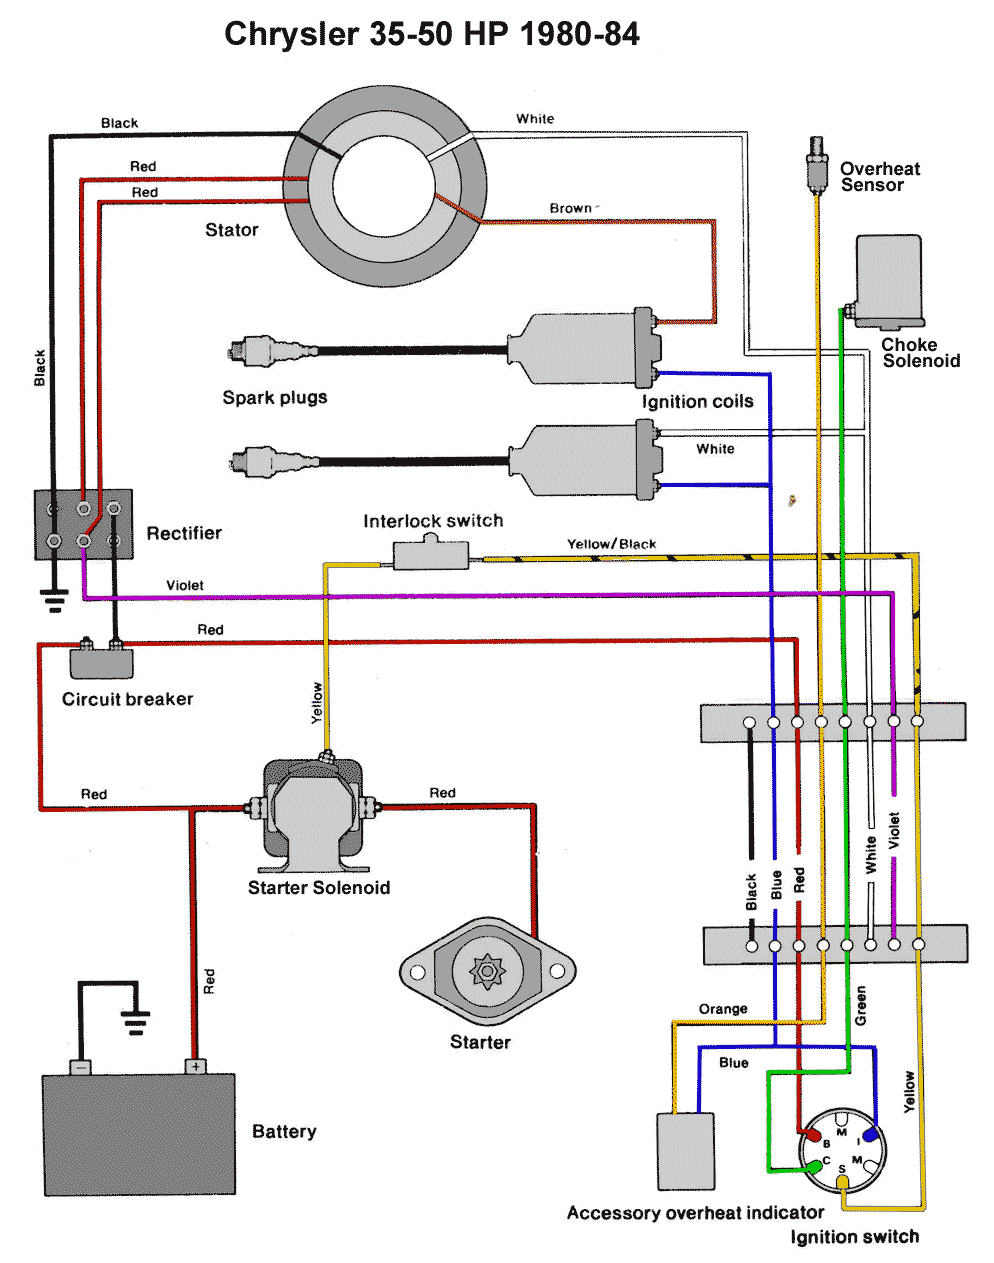 Wiring Diagram For 50 Hp Mercury Outboard from www.maxrules.com